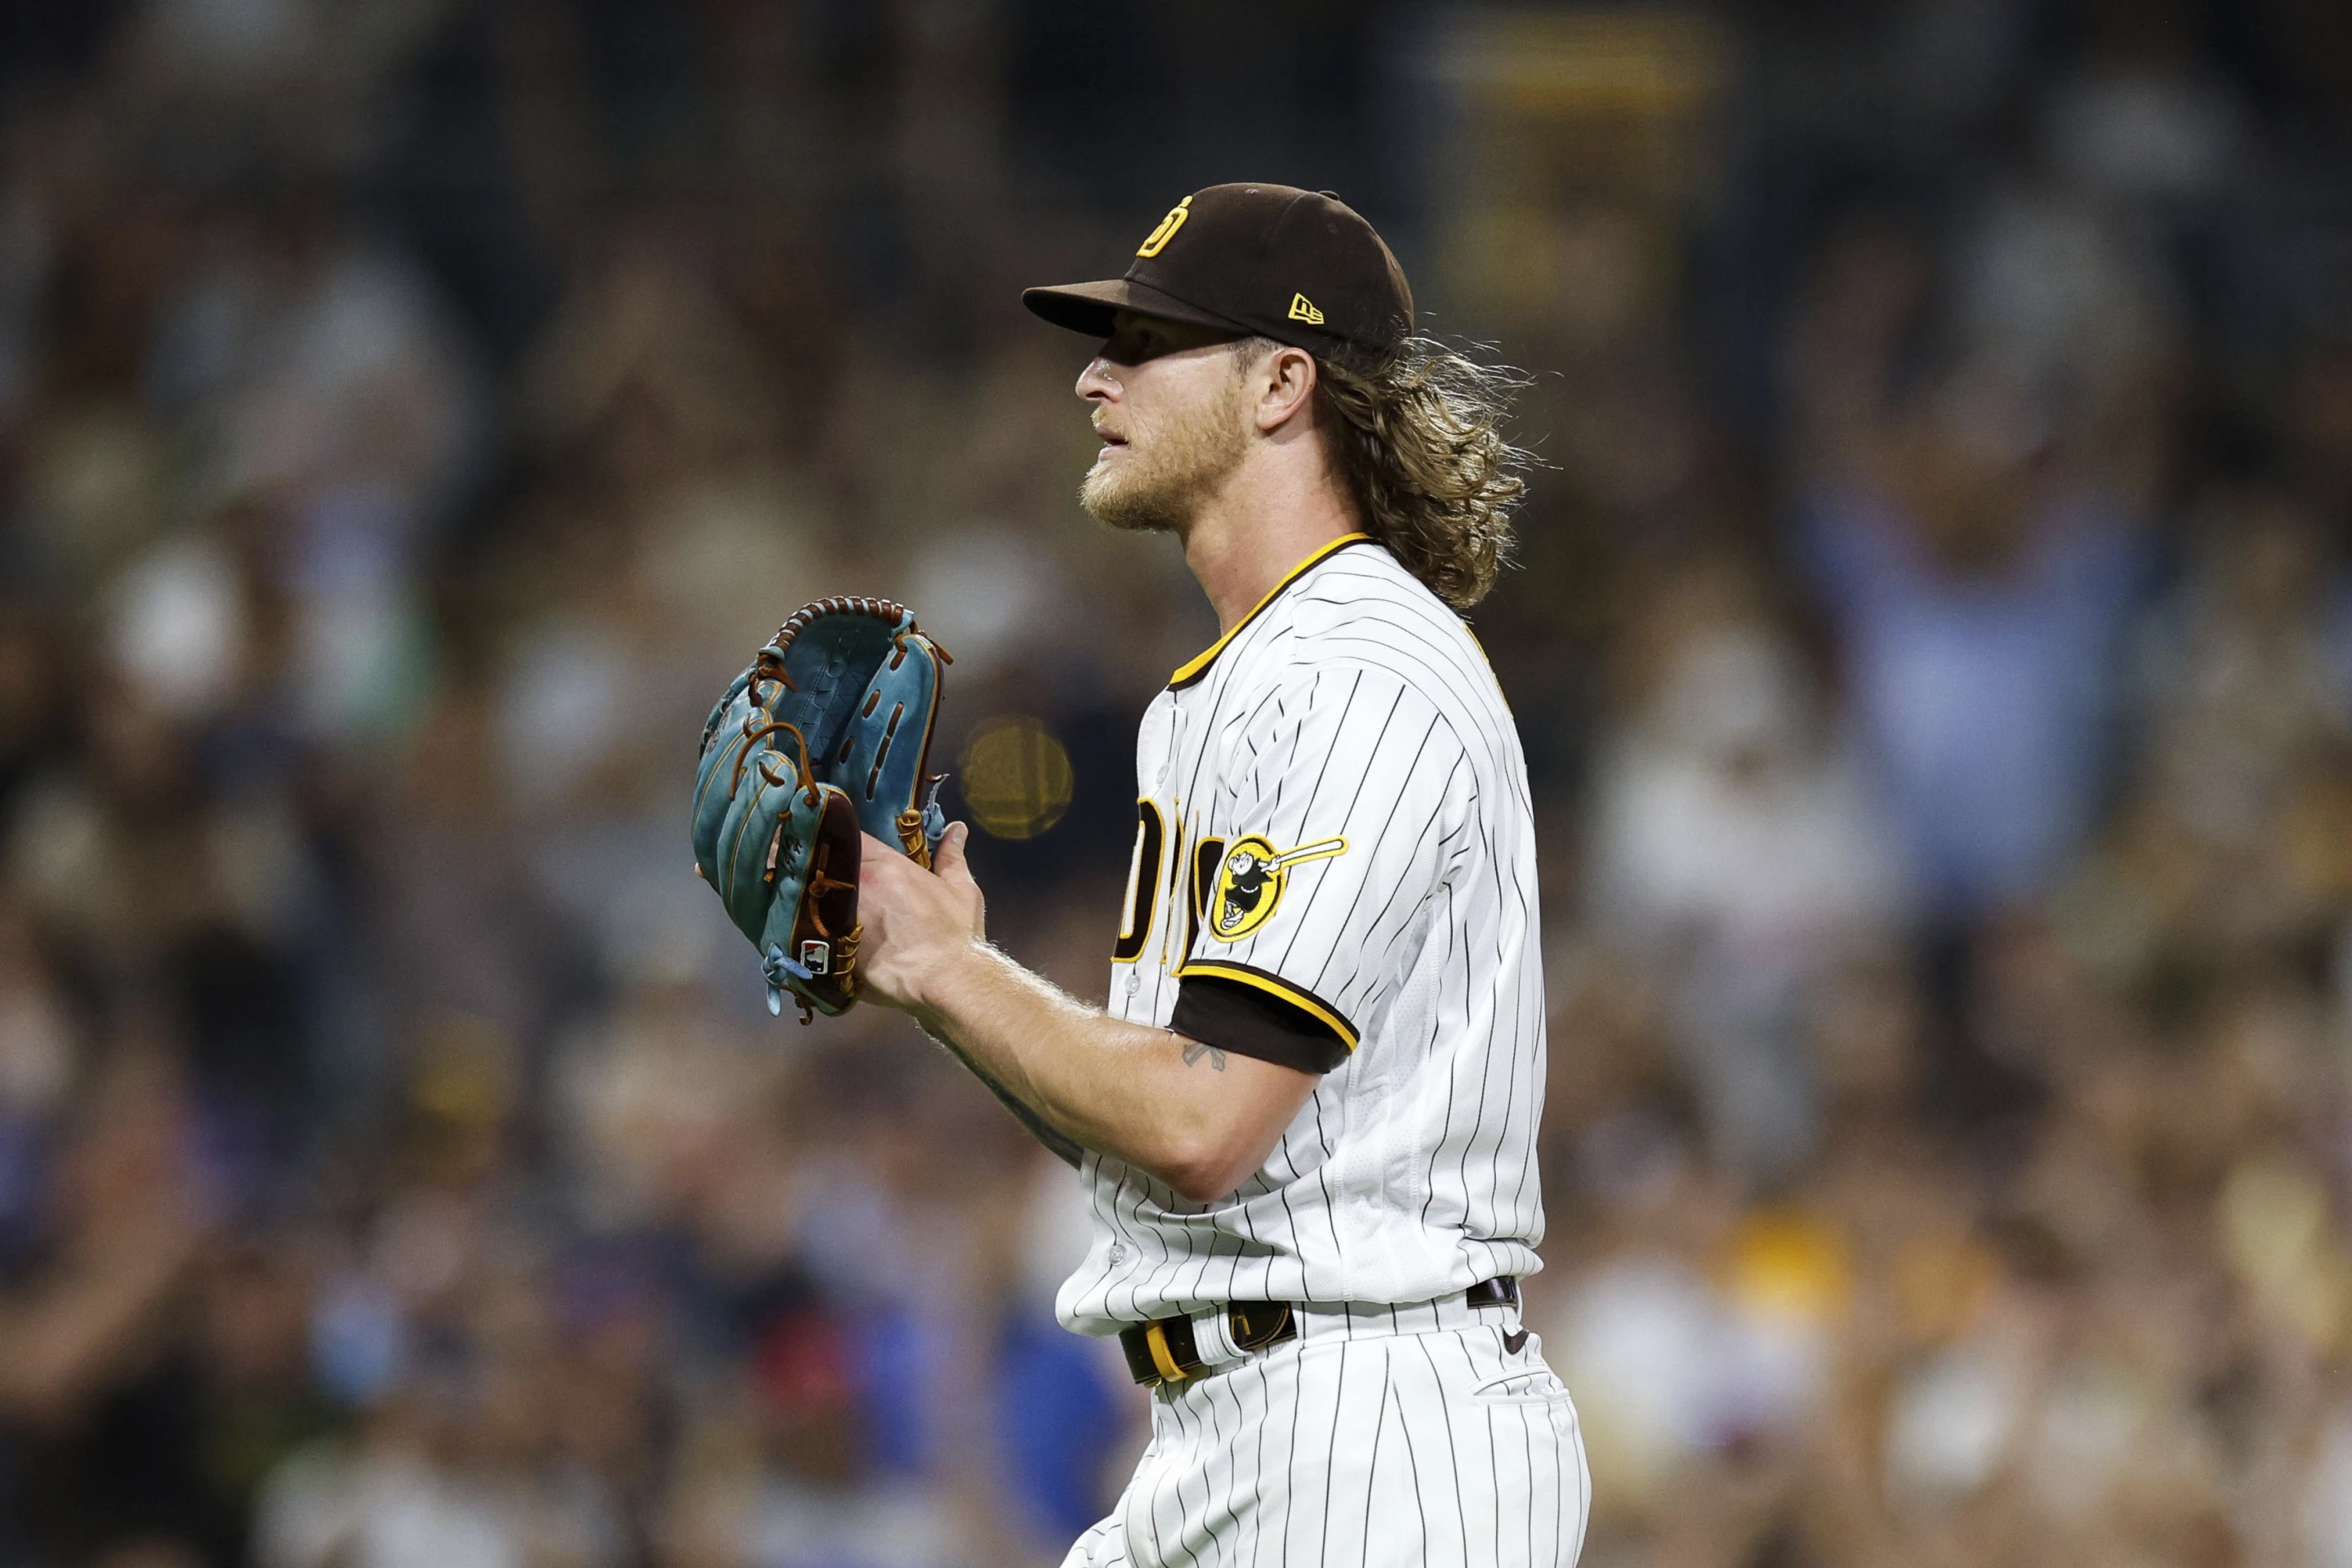 Pitcher Josh Hader of the San Diego Padres competes in the game against the Pittsburgh Pirates at Petco Park in San Diego, California, July 25, 2023. /AP